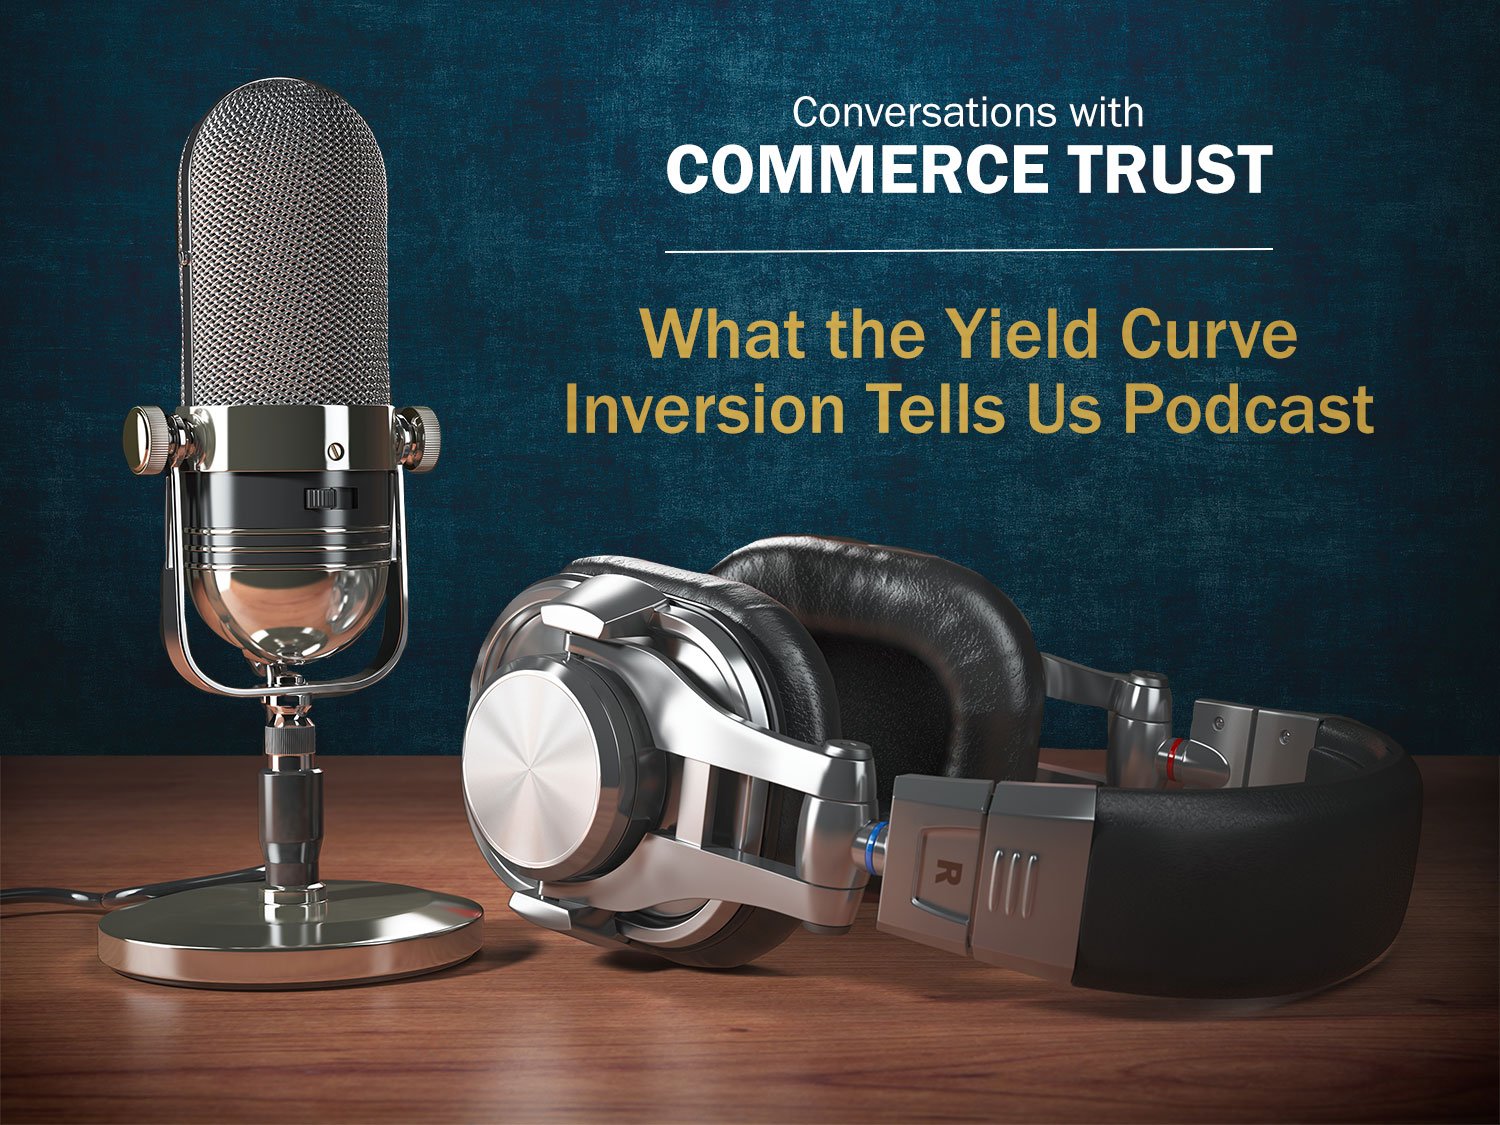 What the Yield Curve Inversion Tells Us Podcast